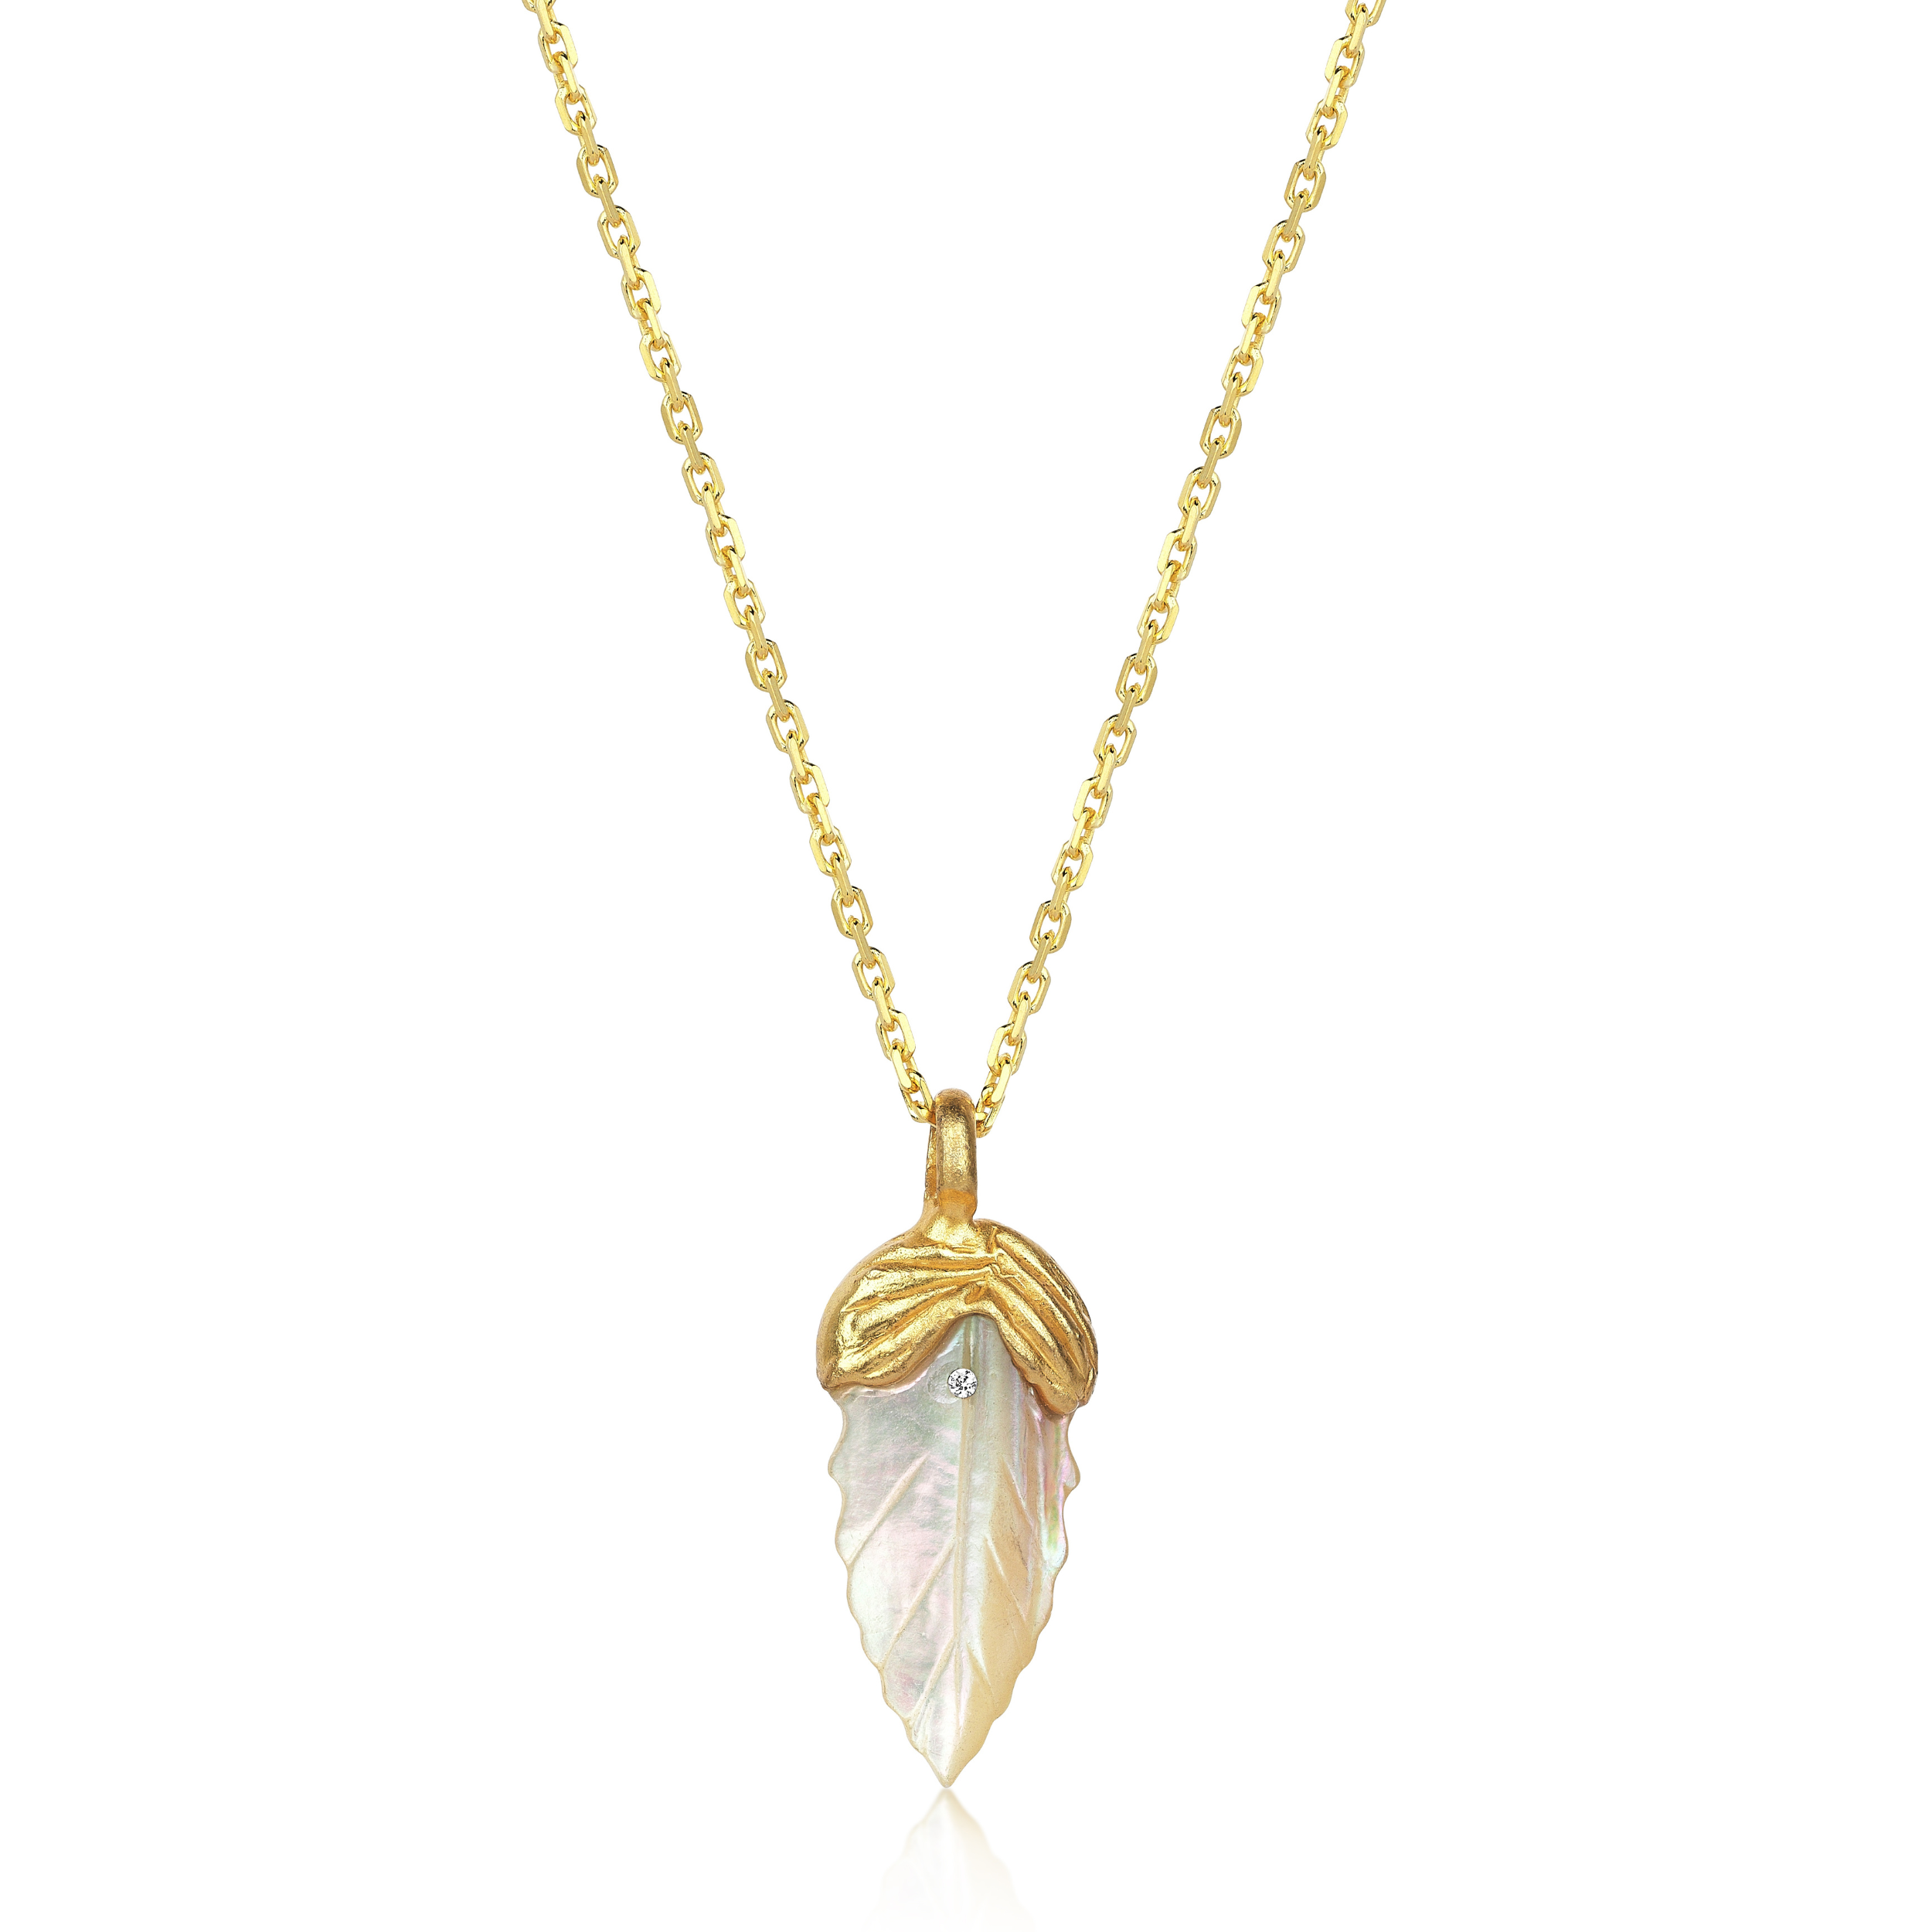 The Mystic Leaf Necklace